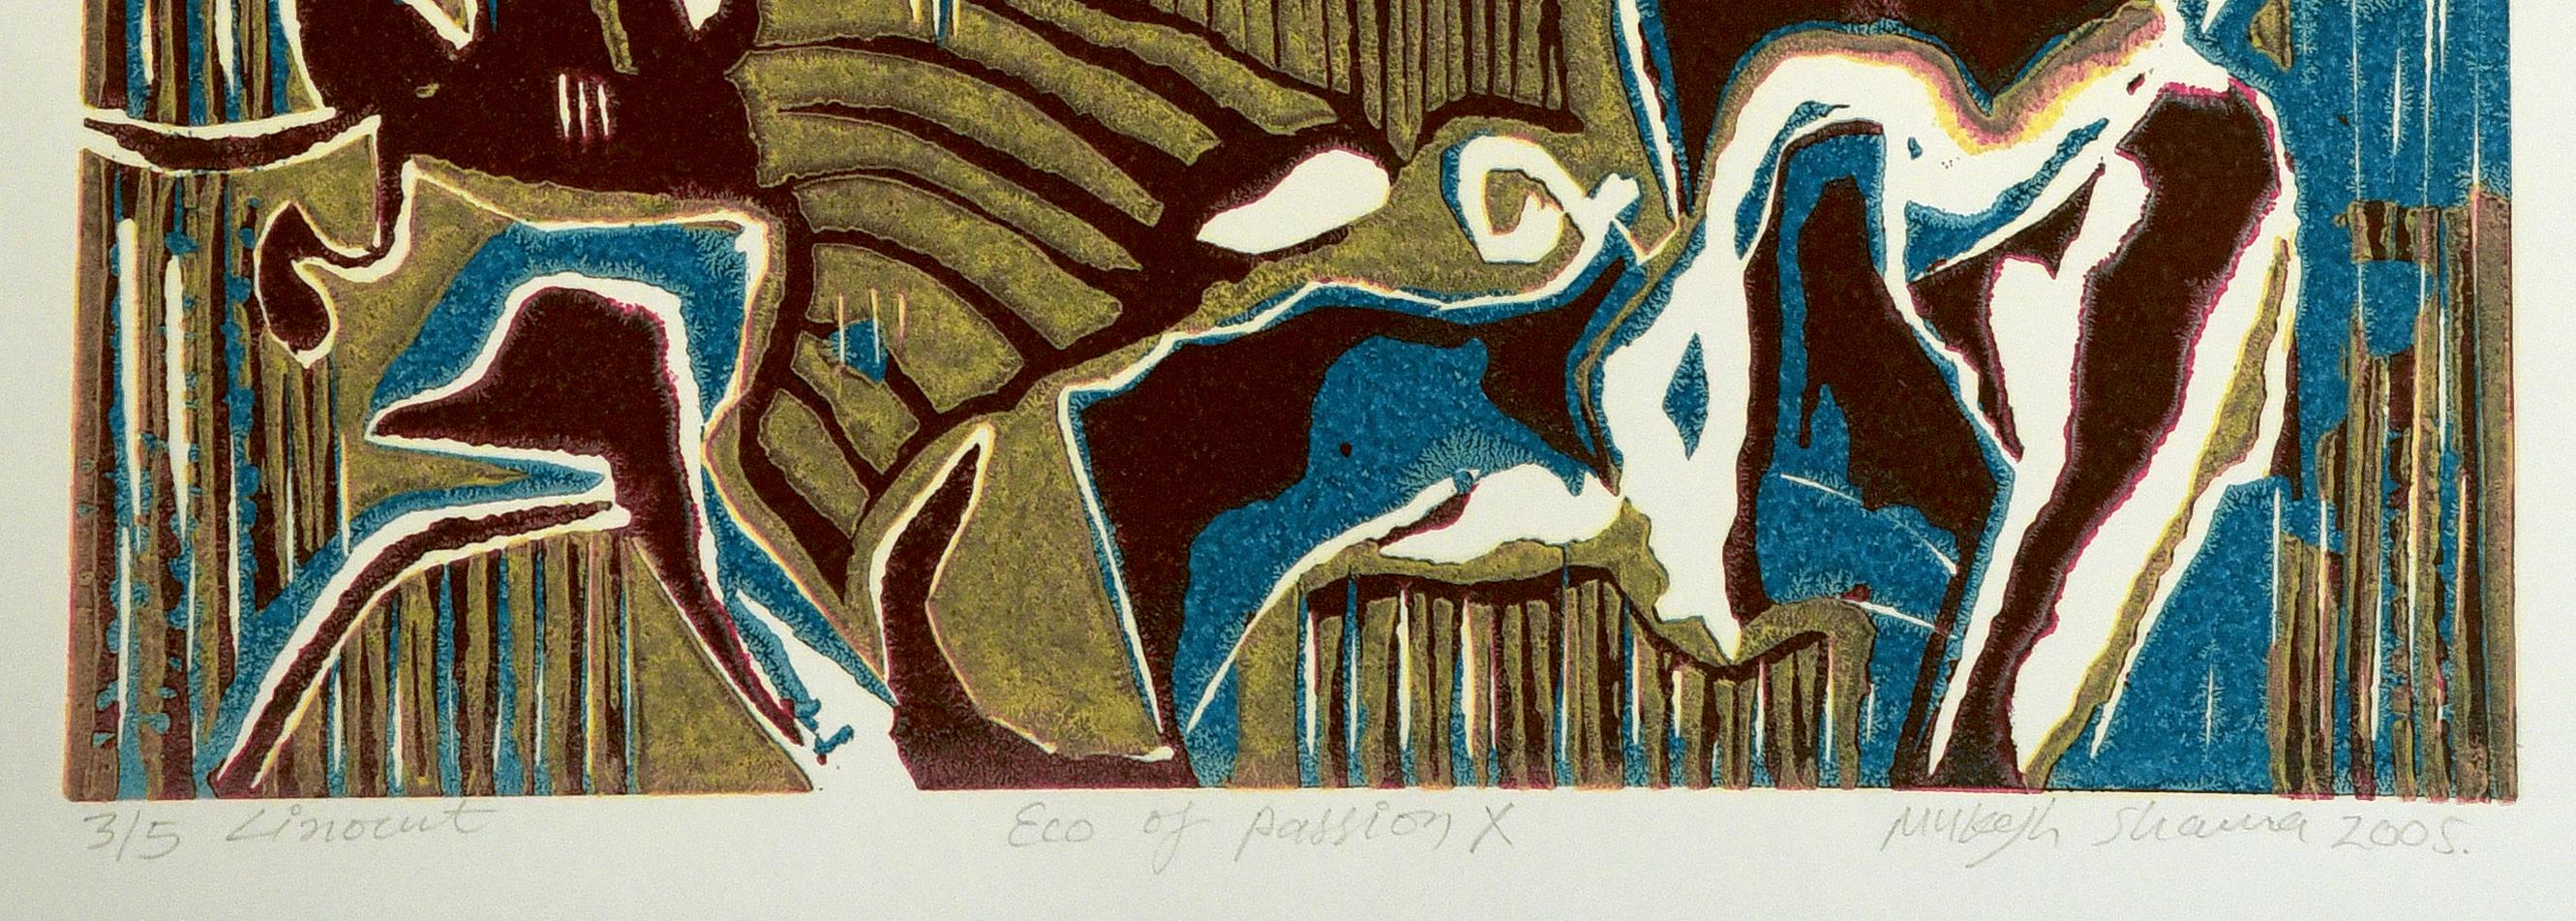 Abstract Landscape India Edition 3/5 Linocut Print Nature Ecco of Passion Blue For Sale 1